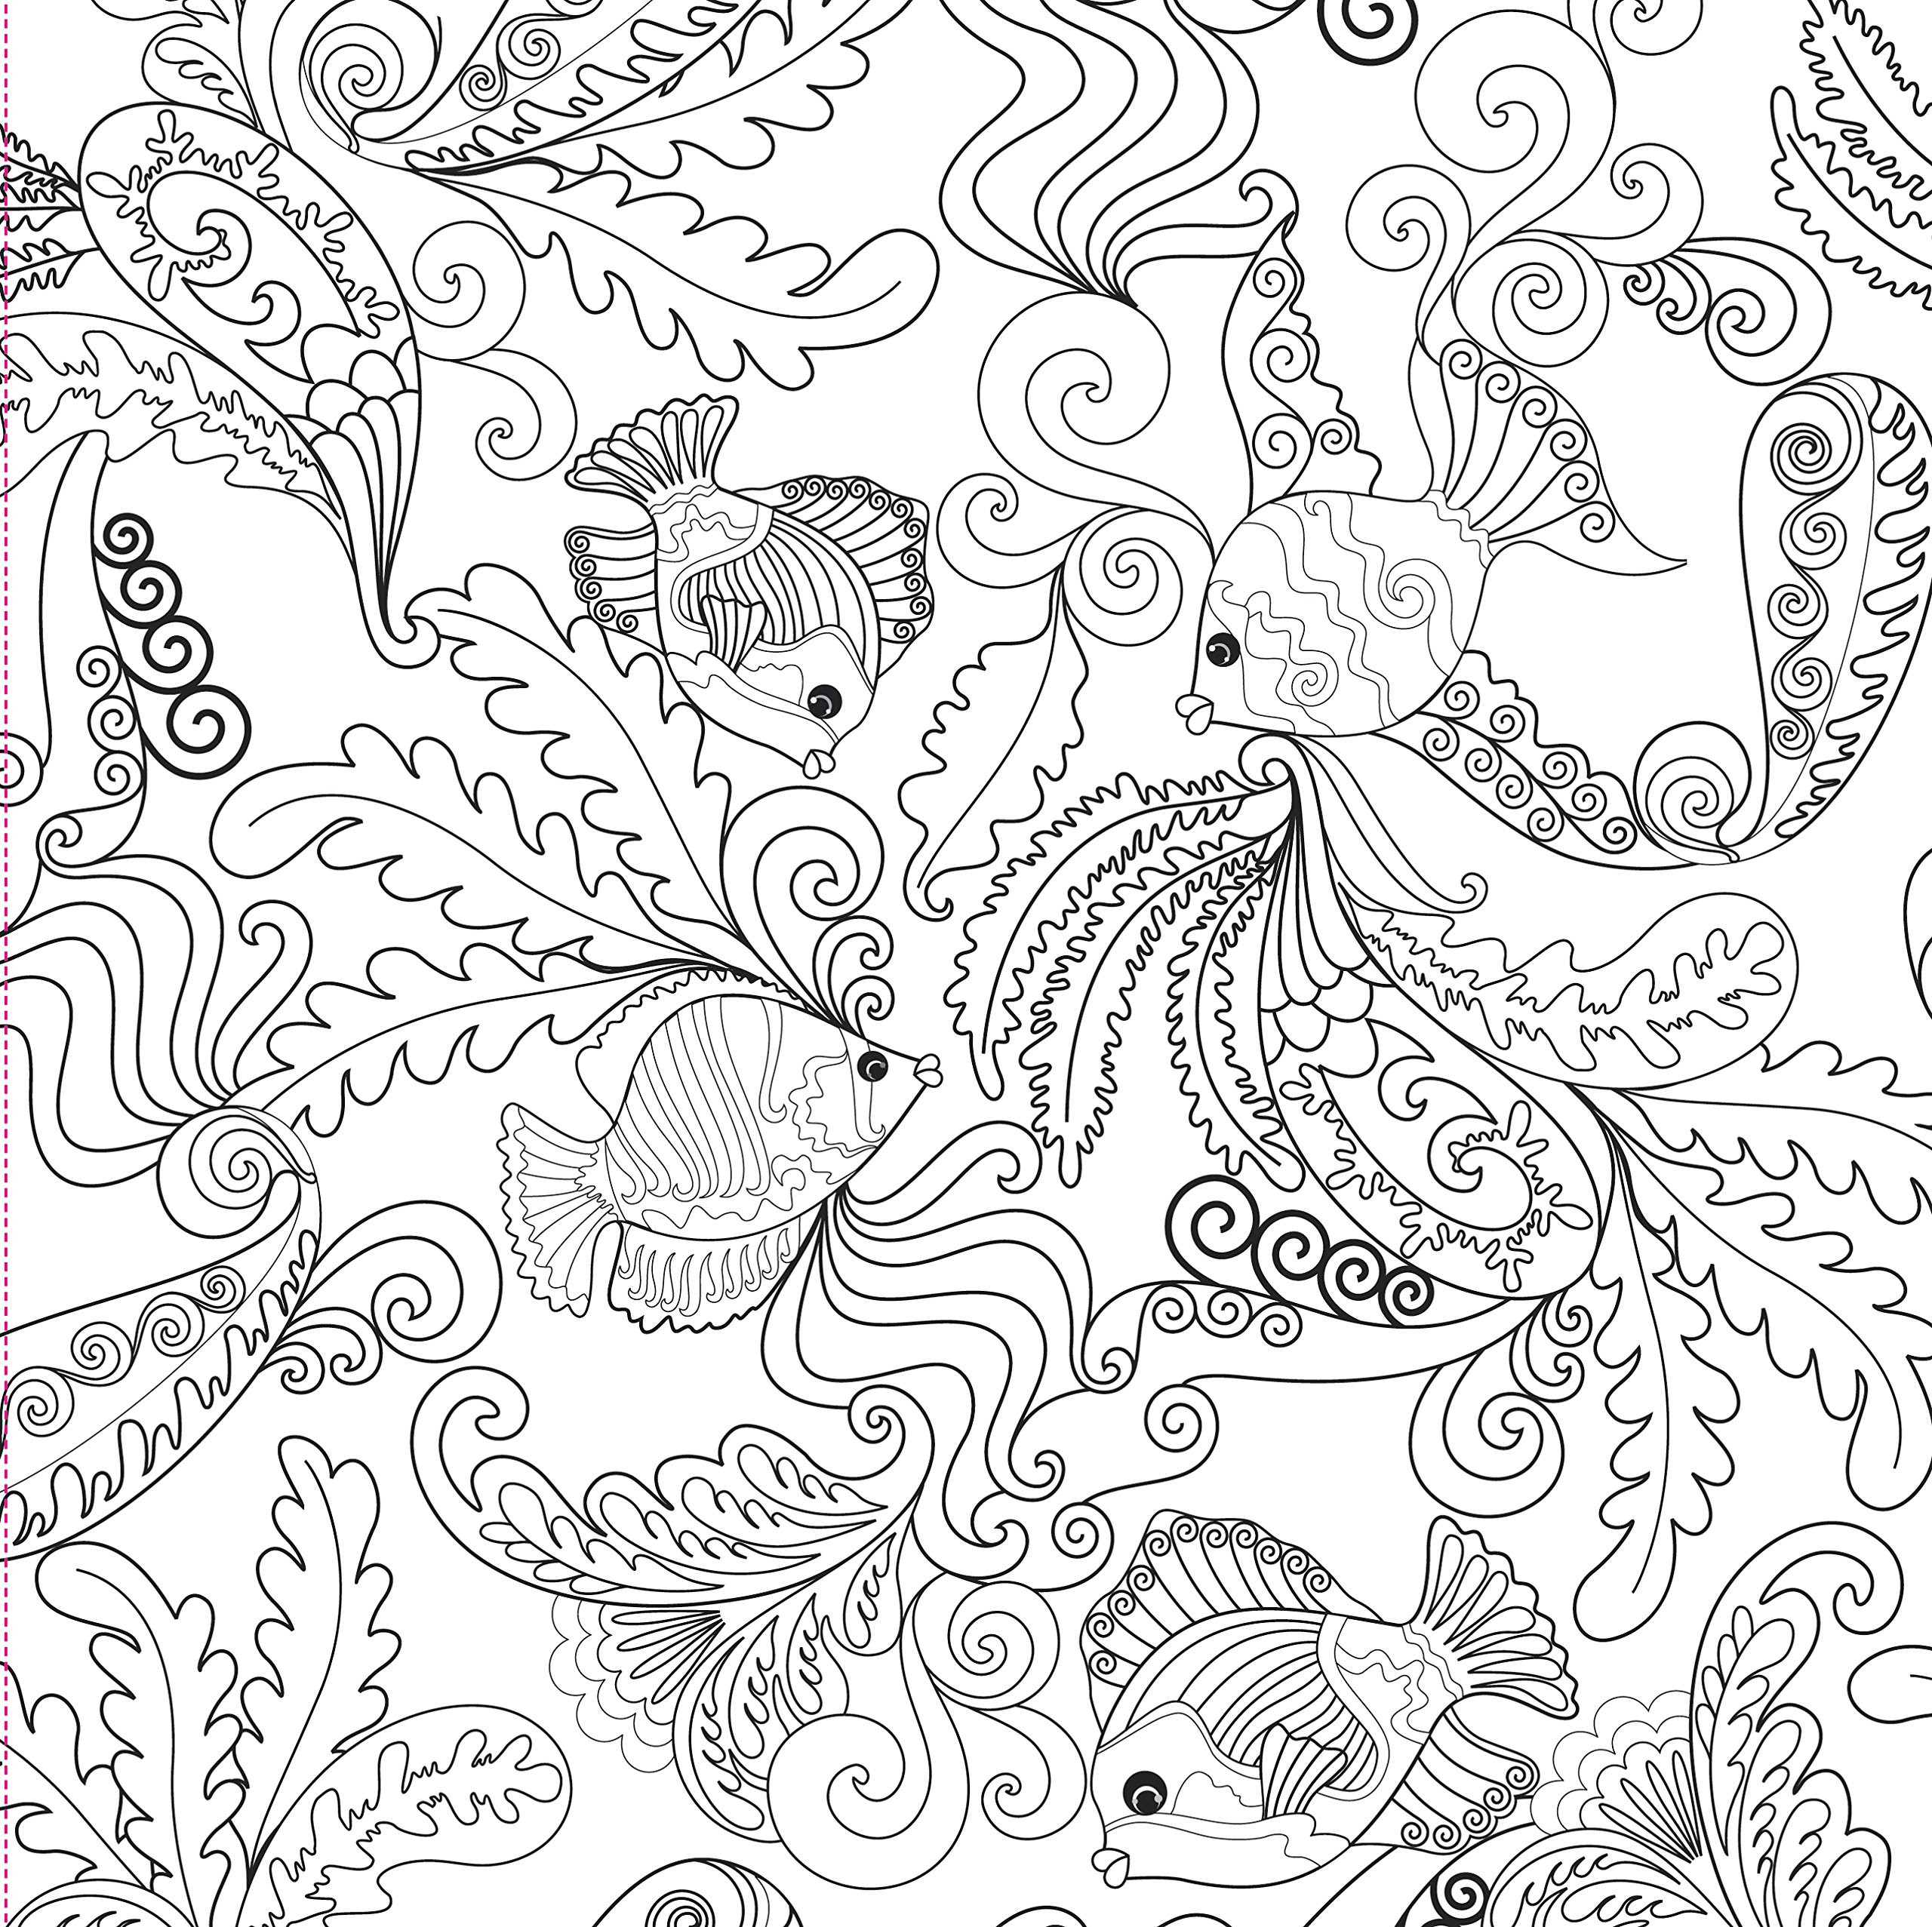 printable-under-the-sea-coloring-pages-for-adults-free-printable